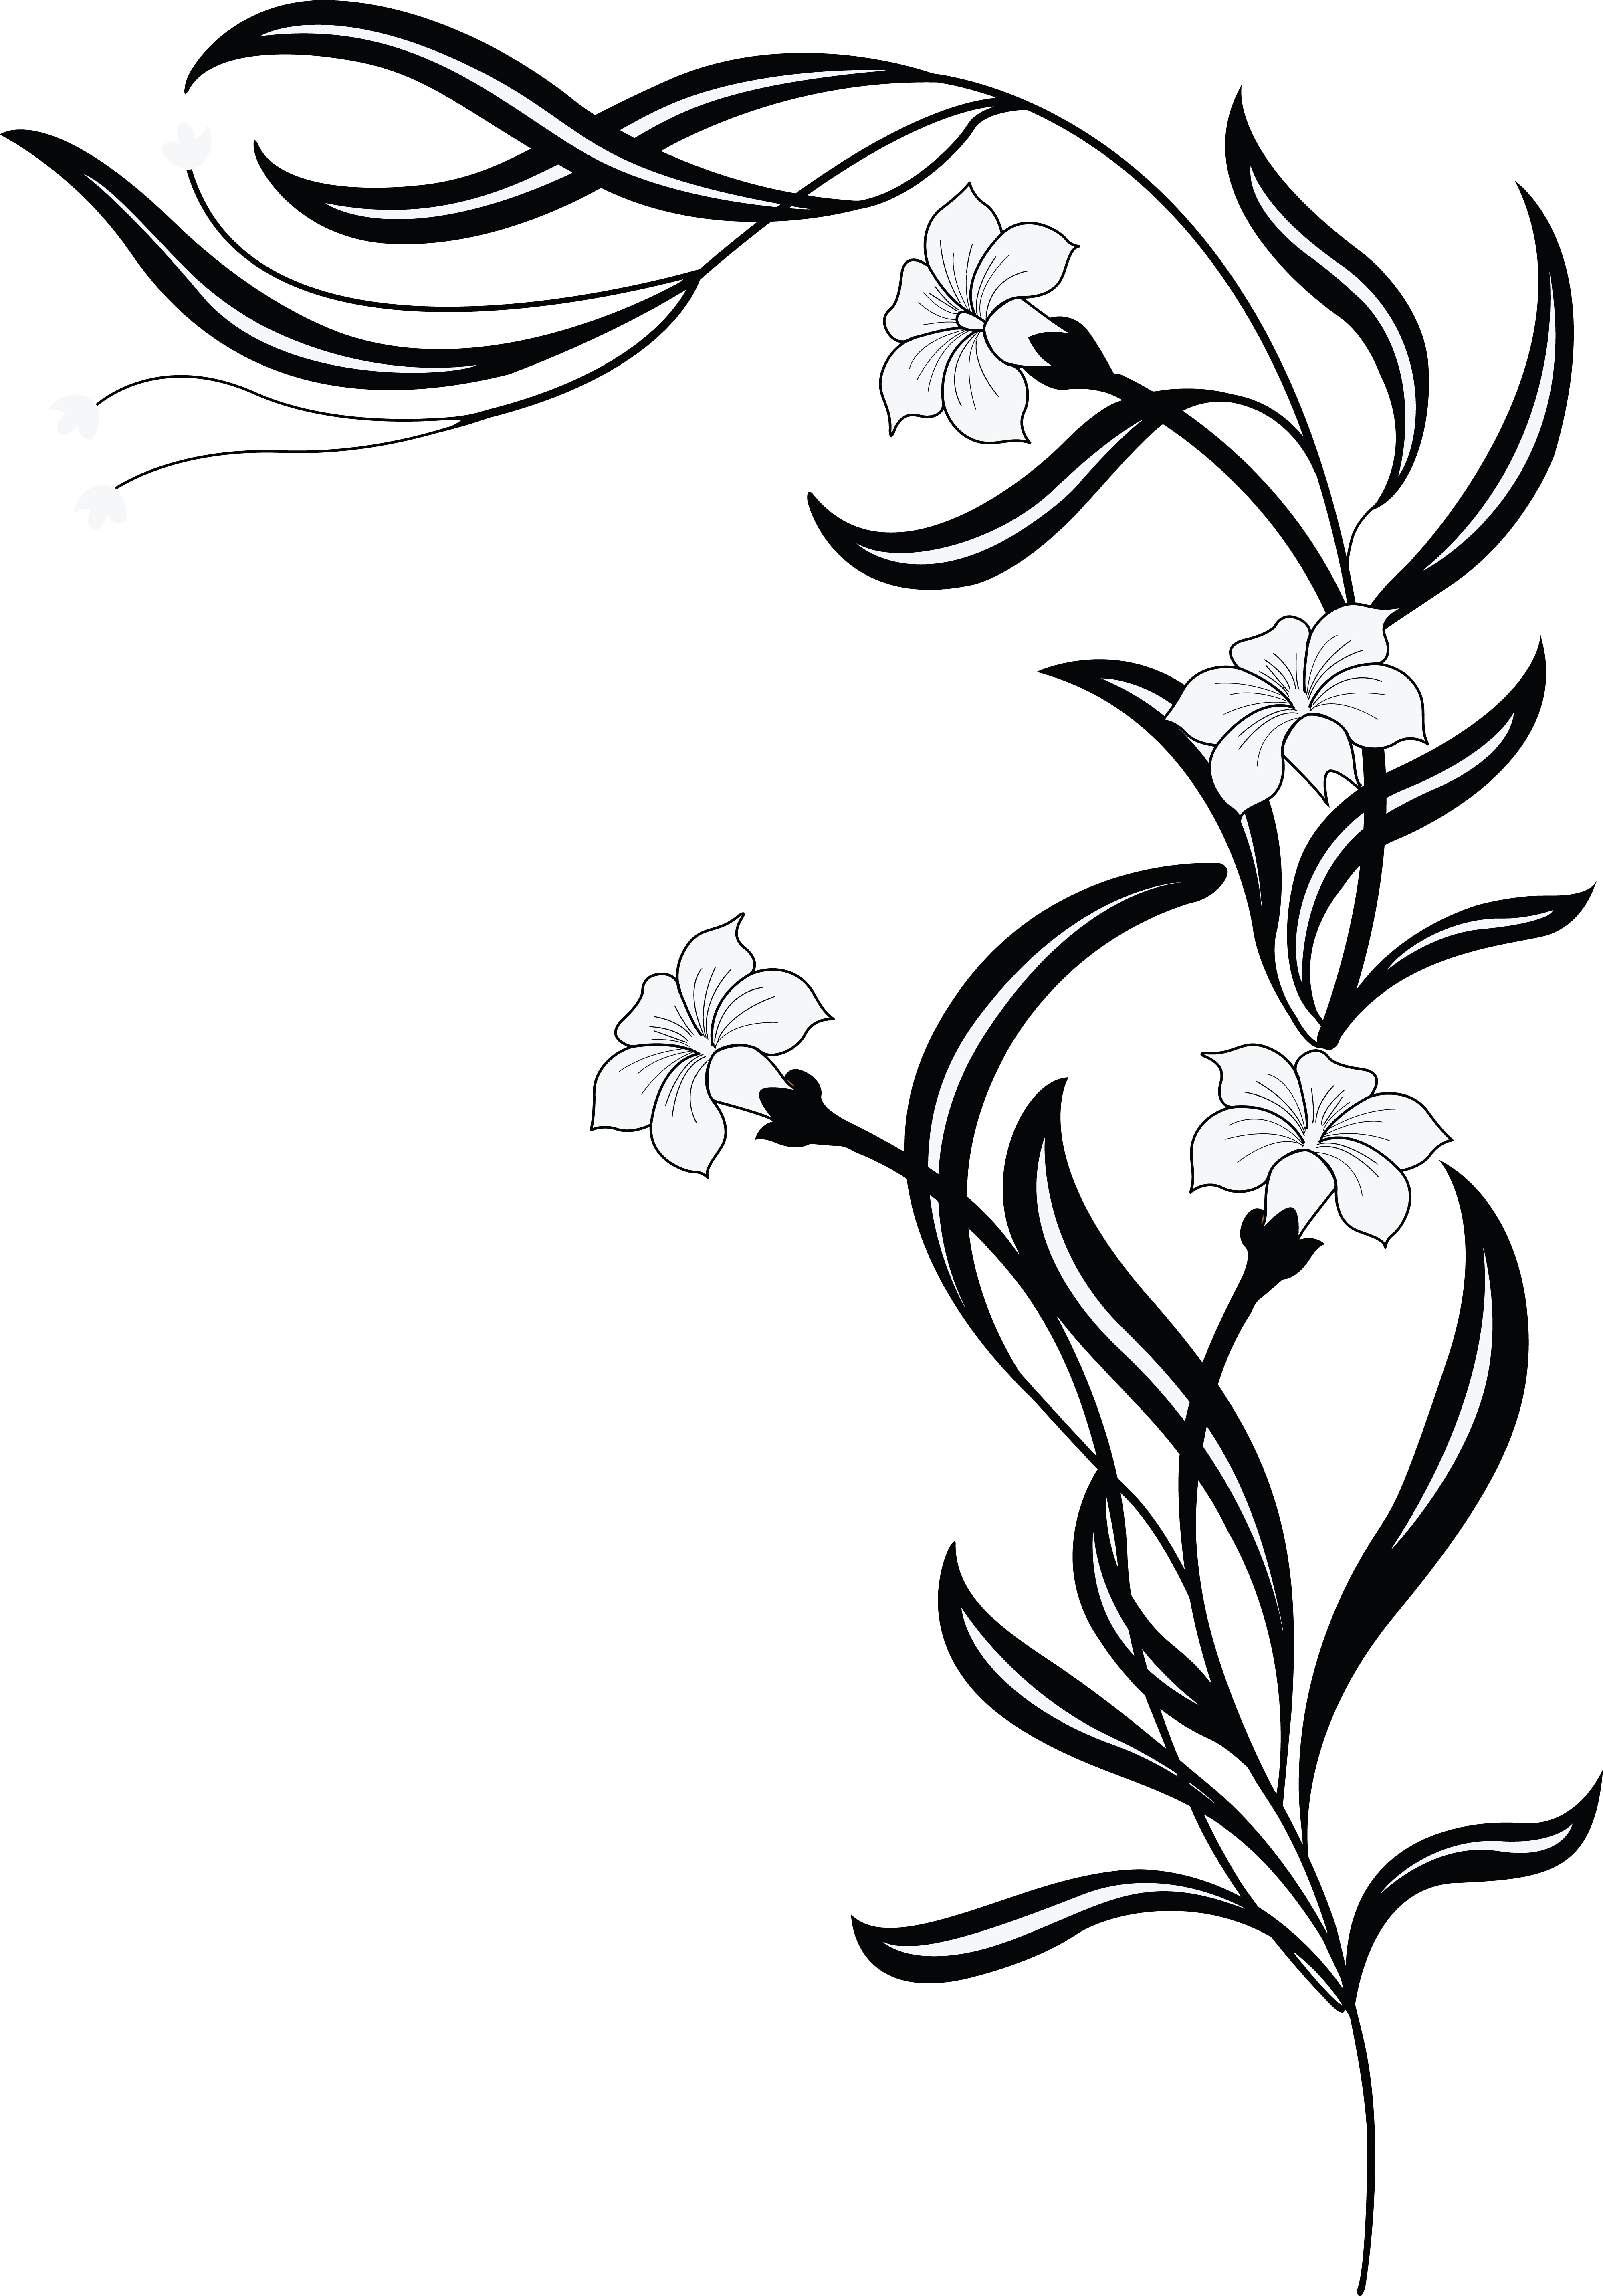 Free Clipart Of A grayscale floral vine.